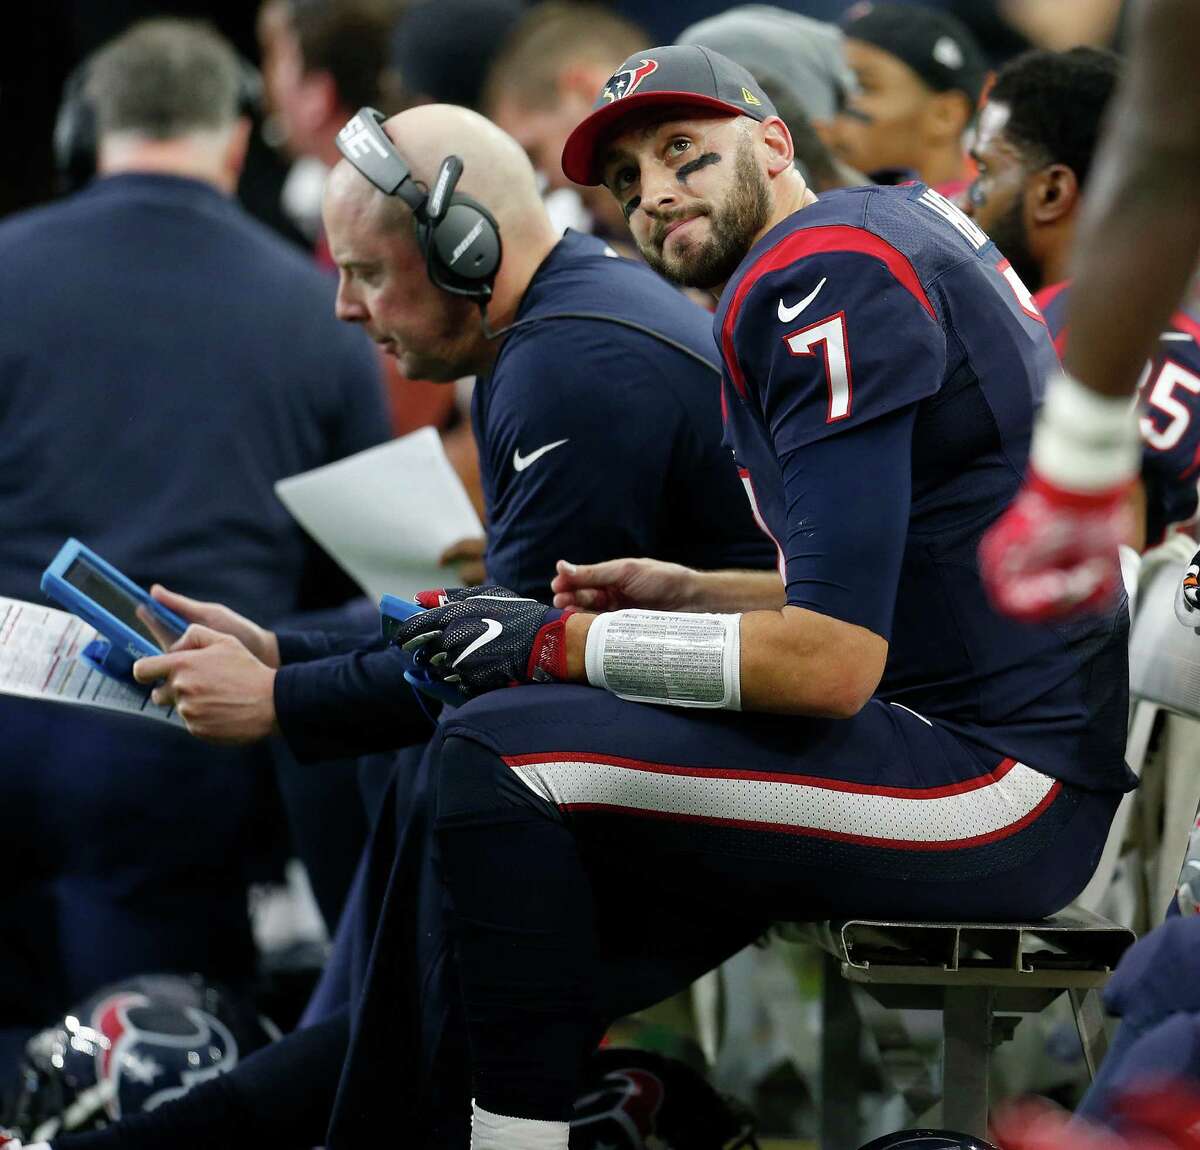 The meltdown by Brian Hoyer (7) on Saturday gives rise to renewed concerns about the inability of the Texans to find a permanent solution at quarterback.